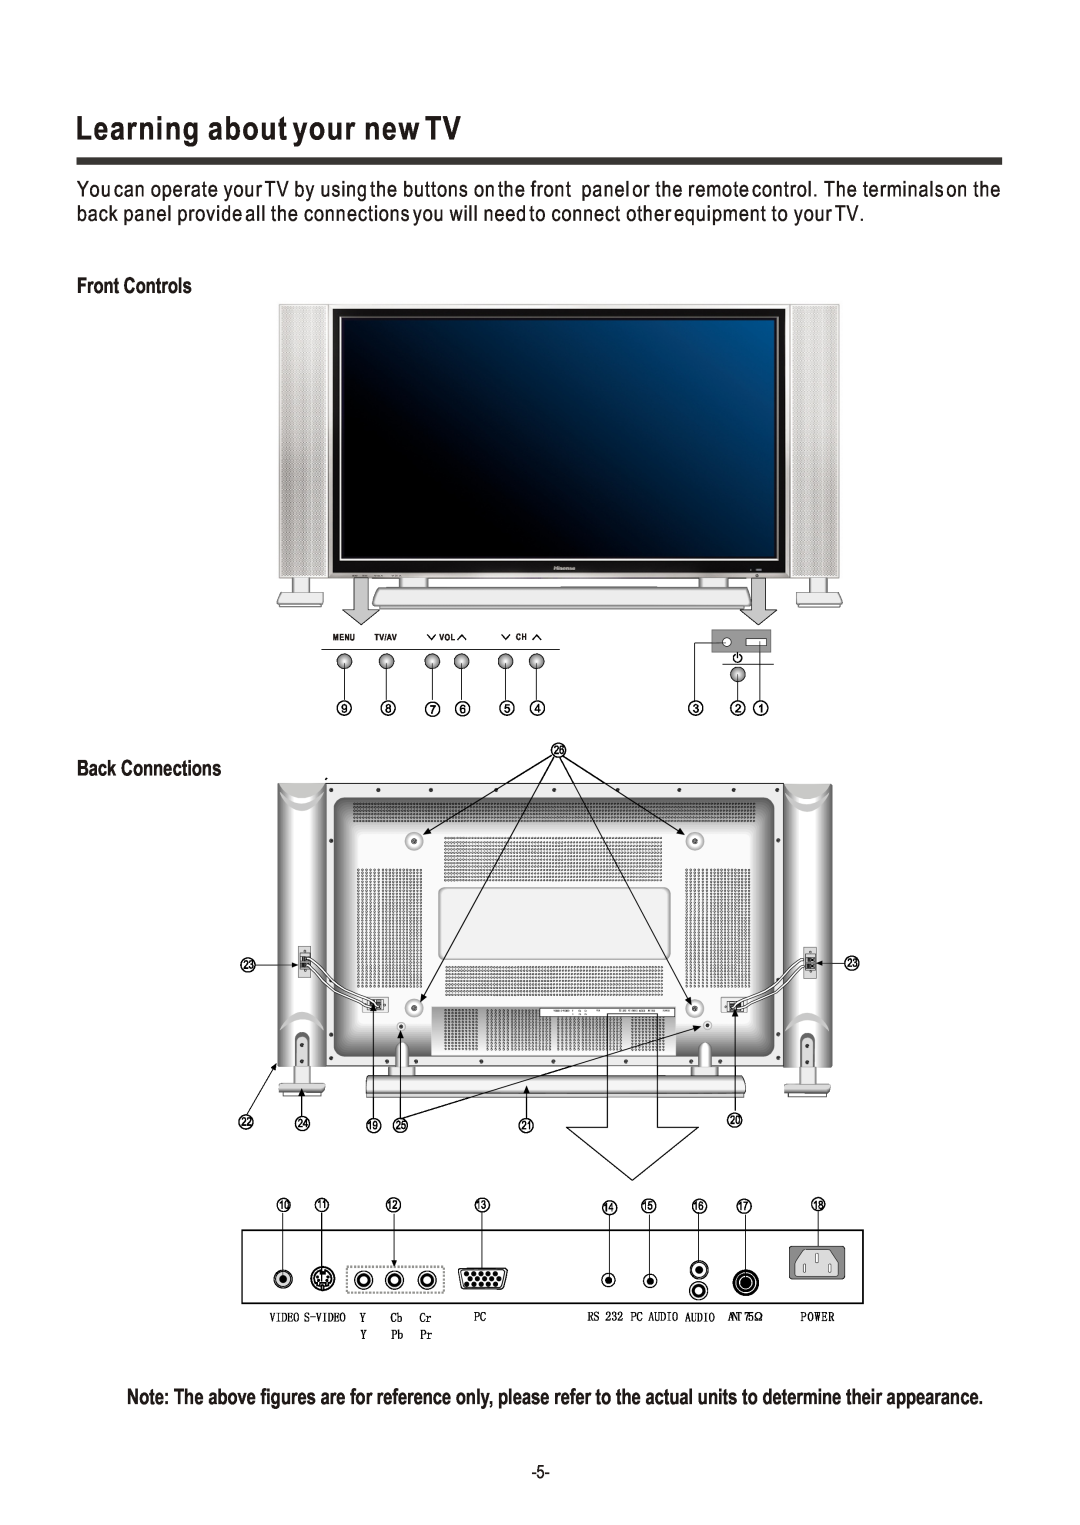 Hisense Group TA42P40M user manual Learning about your new TV, Front Controls, Back Connections, Menu Tv/Av Vol Ch 